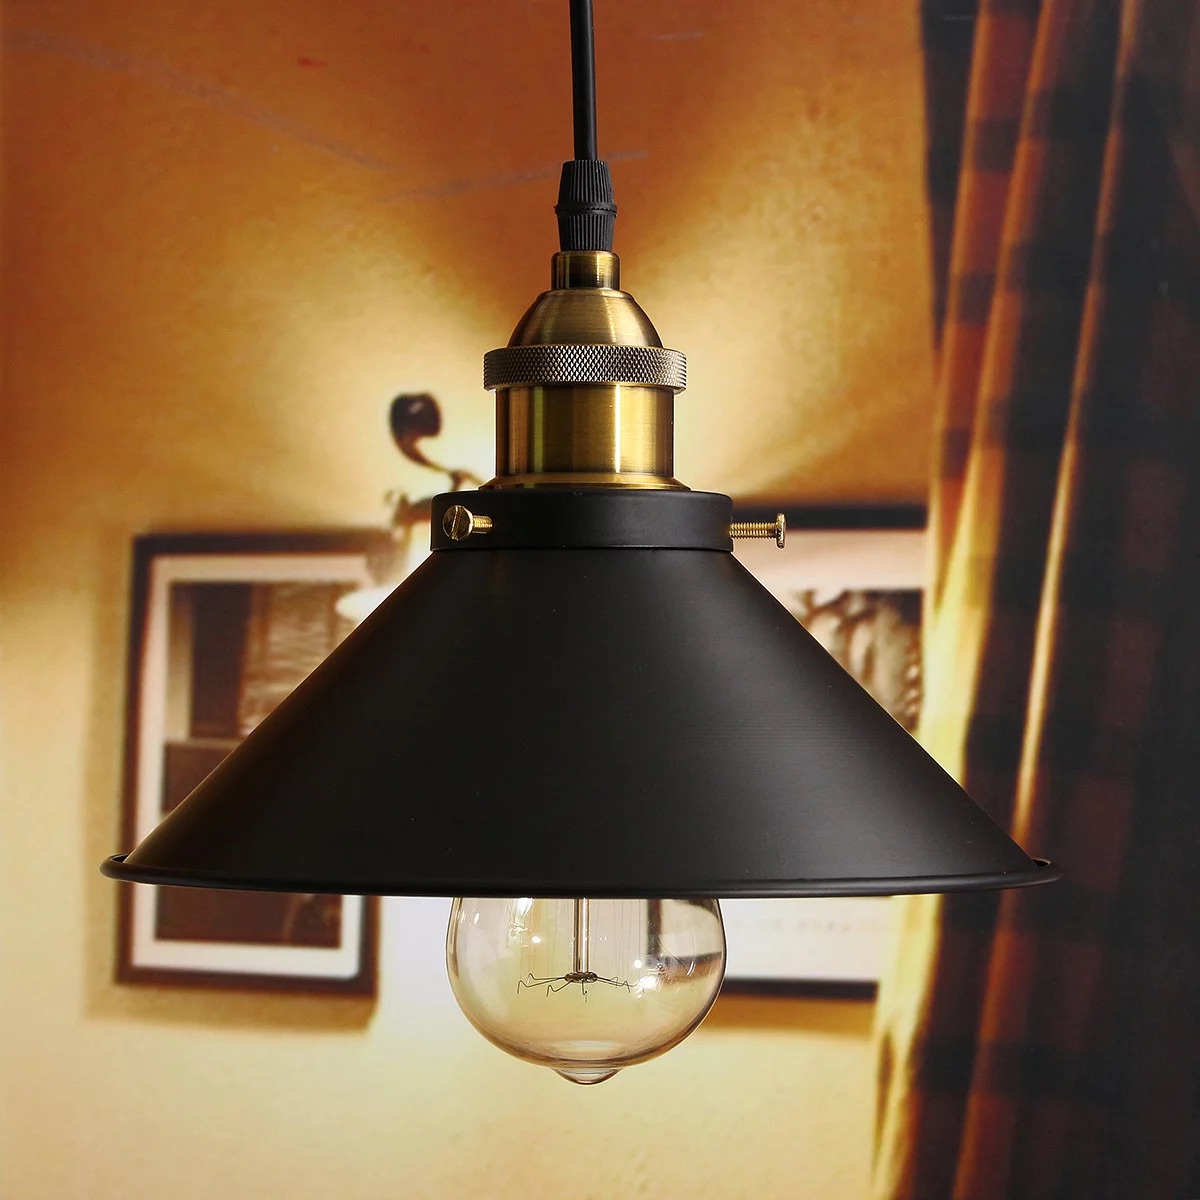 How To Hang A Lamp From The Ceiling Without Drilling